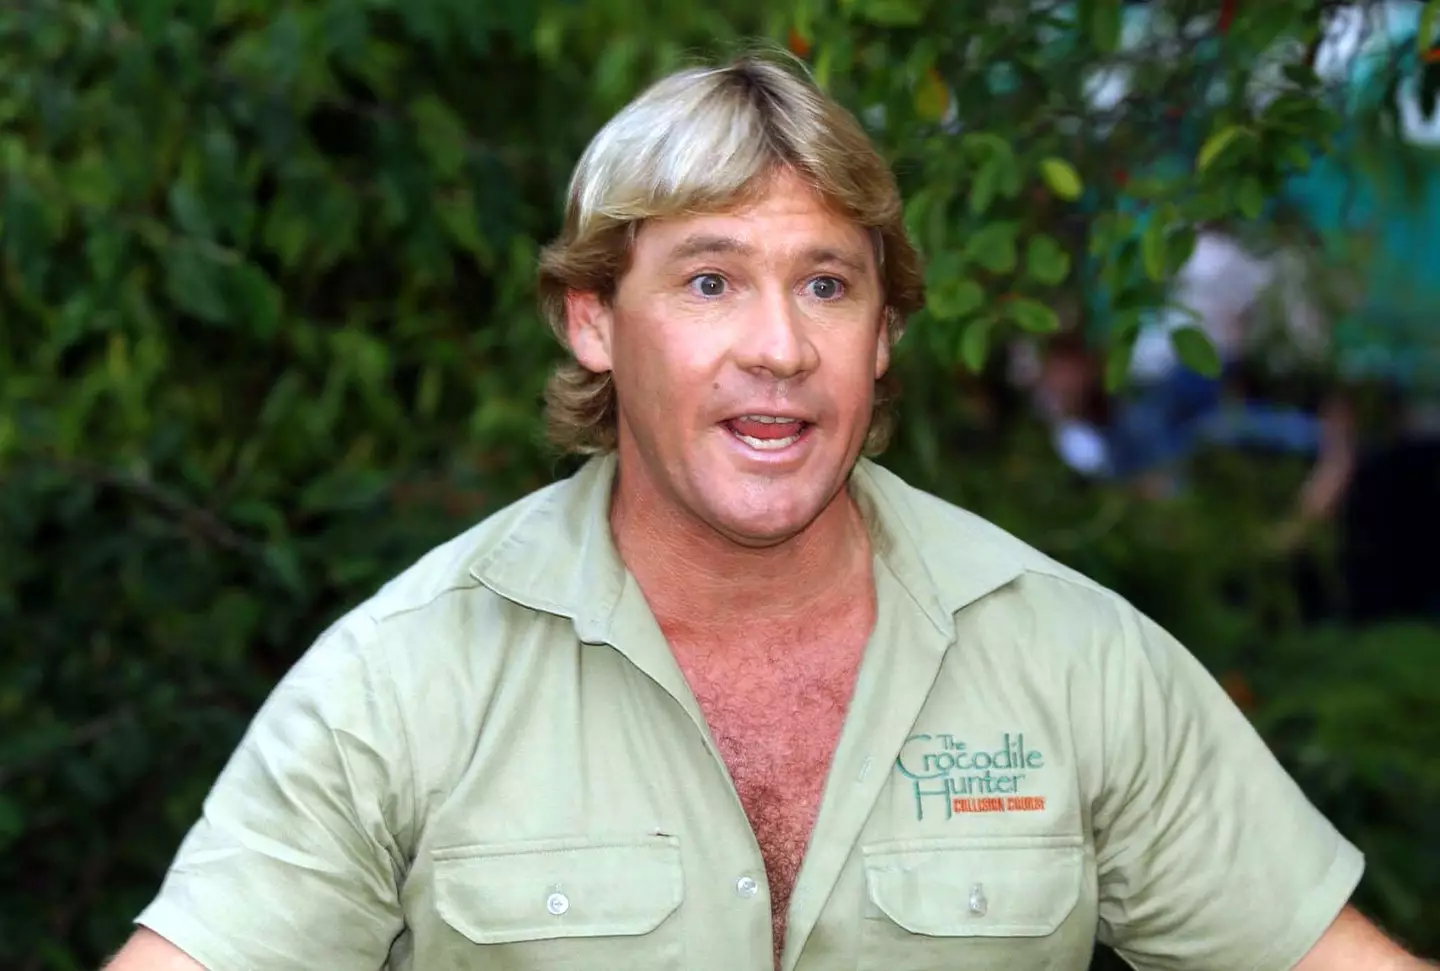 Steve Irwin's sadly died in 2006 after being stung by a stingray.